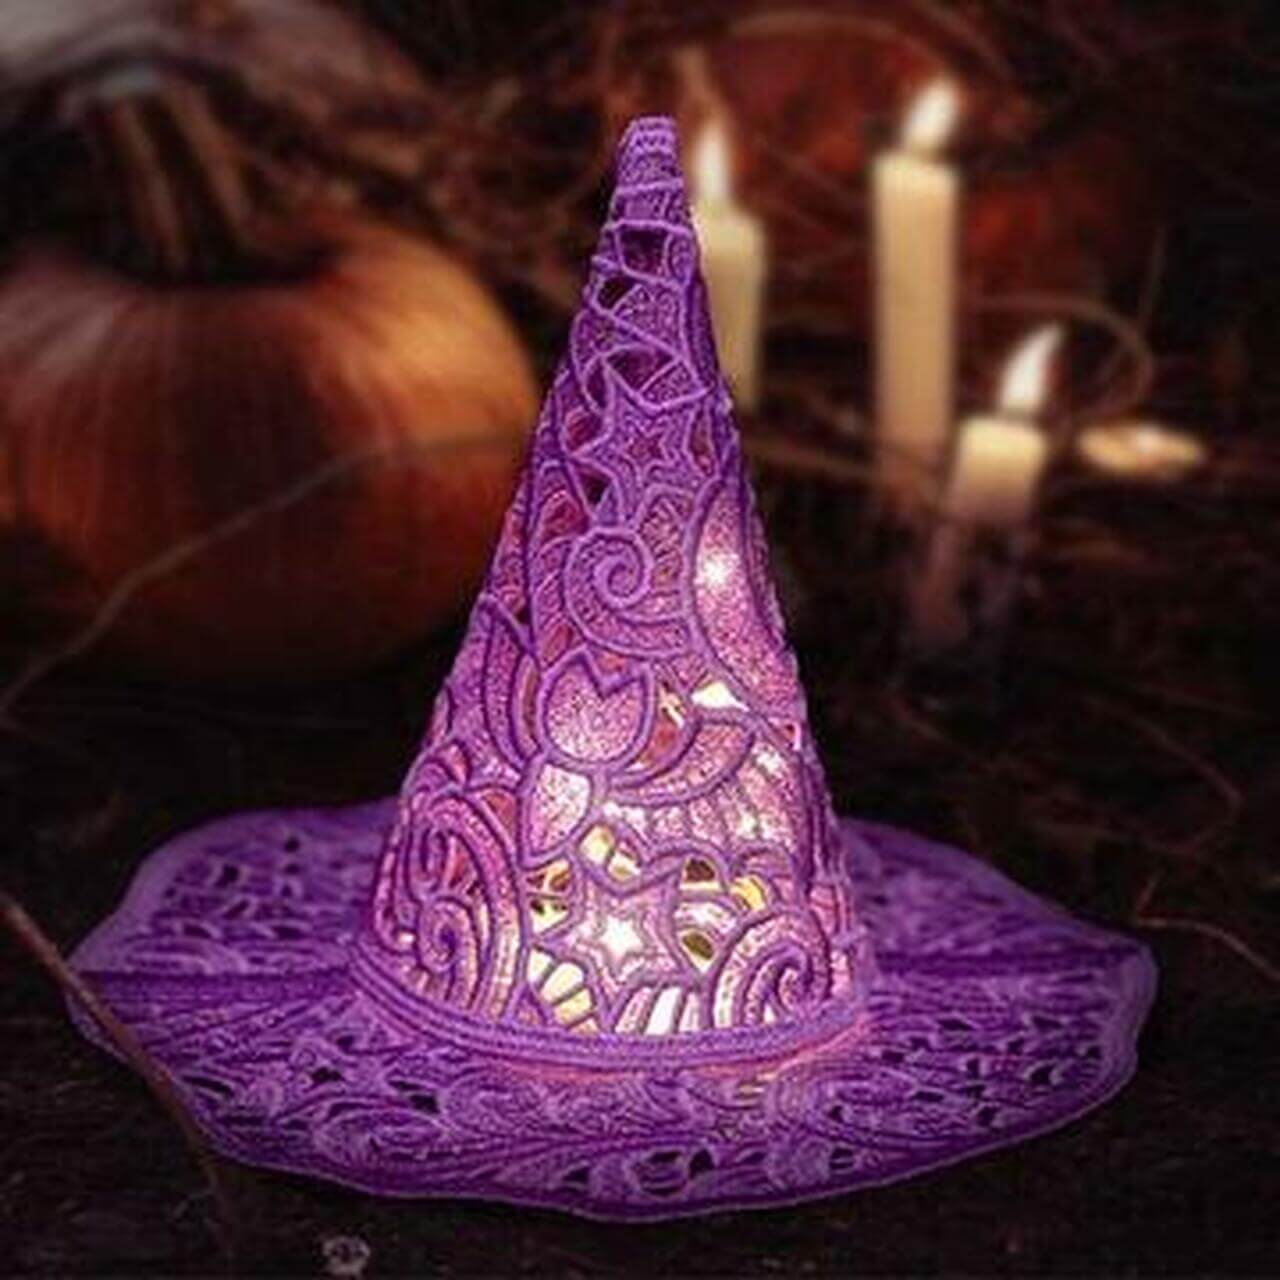 OESD's #12781 Freestanding Witch's Hat available at Nancy Zieman Productions at ShopNZP.com